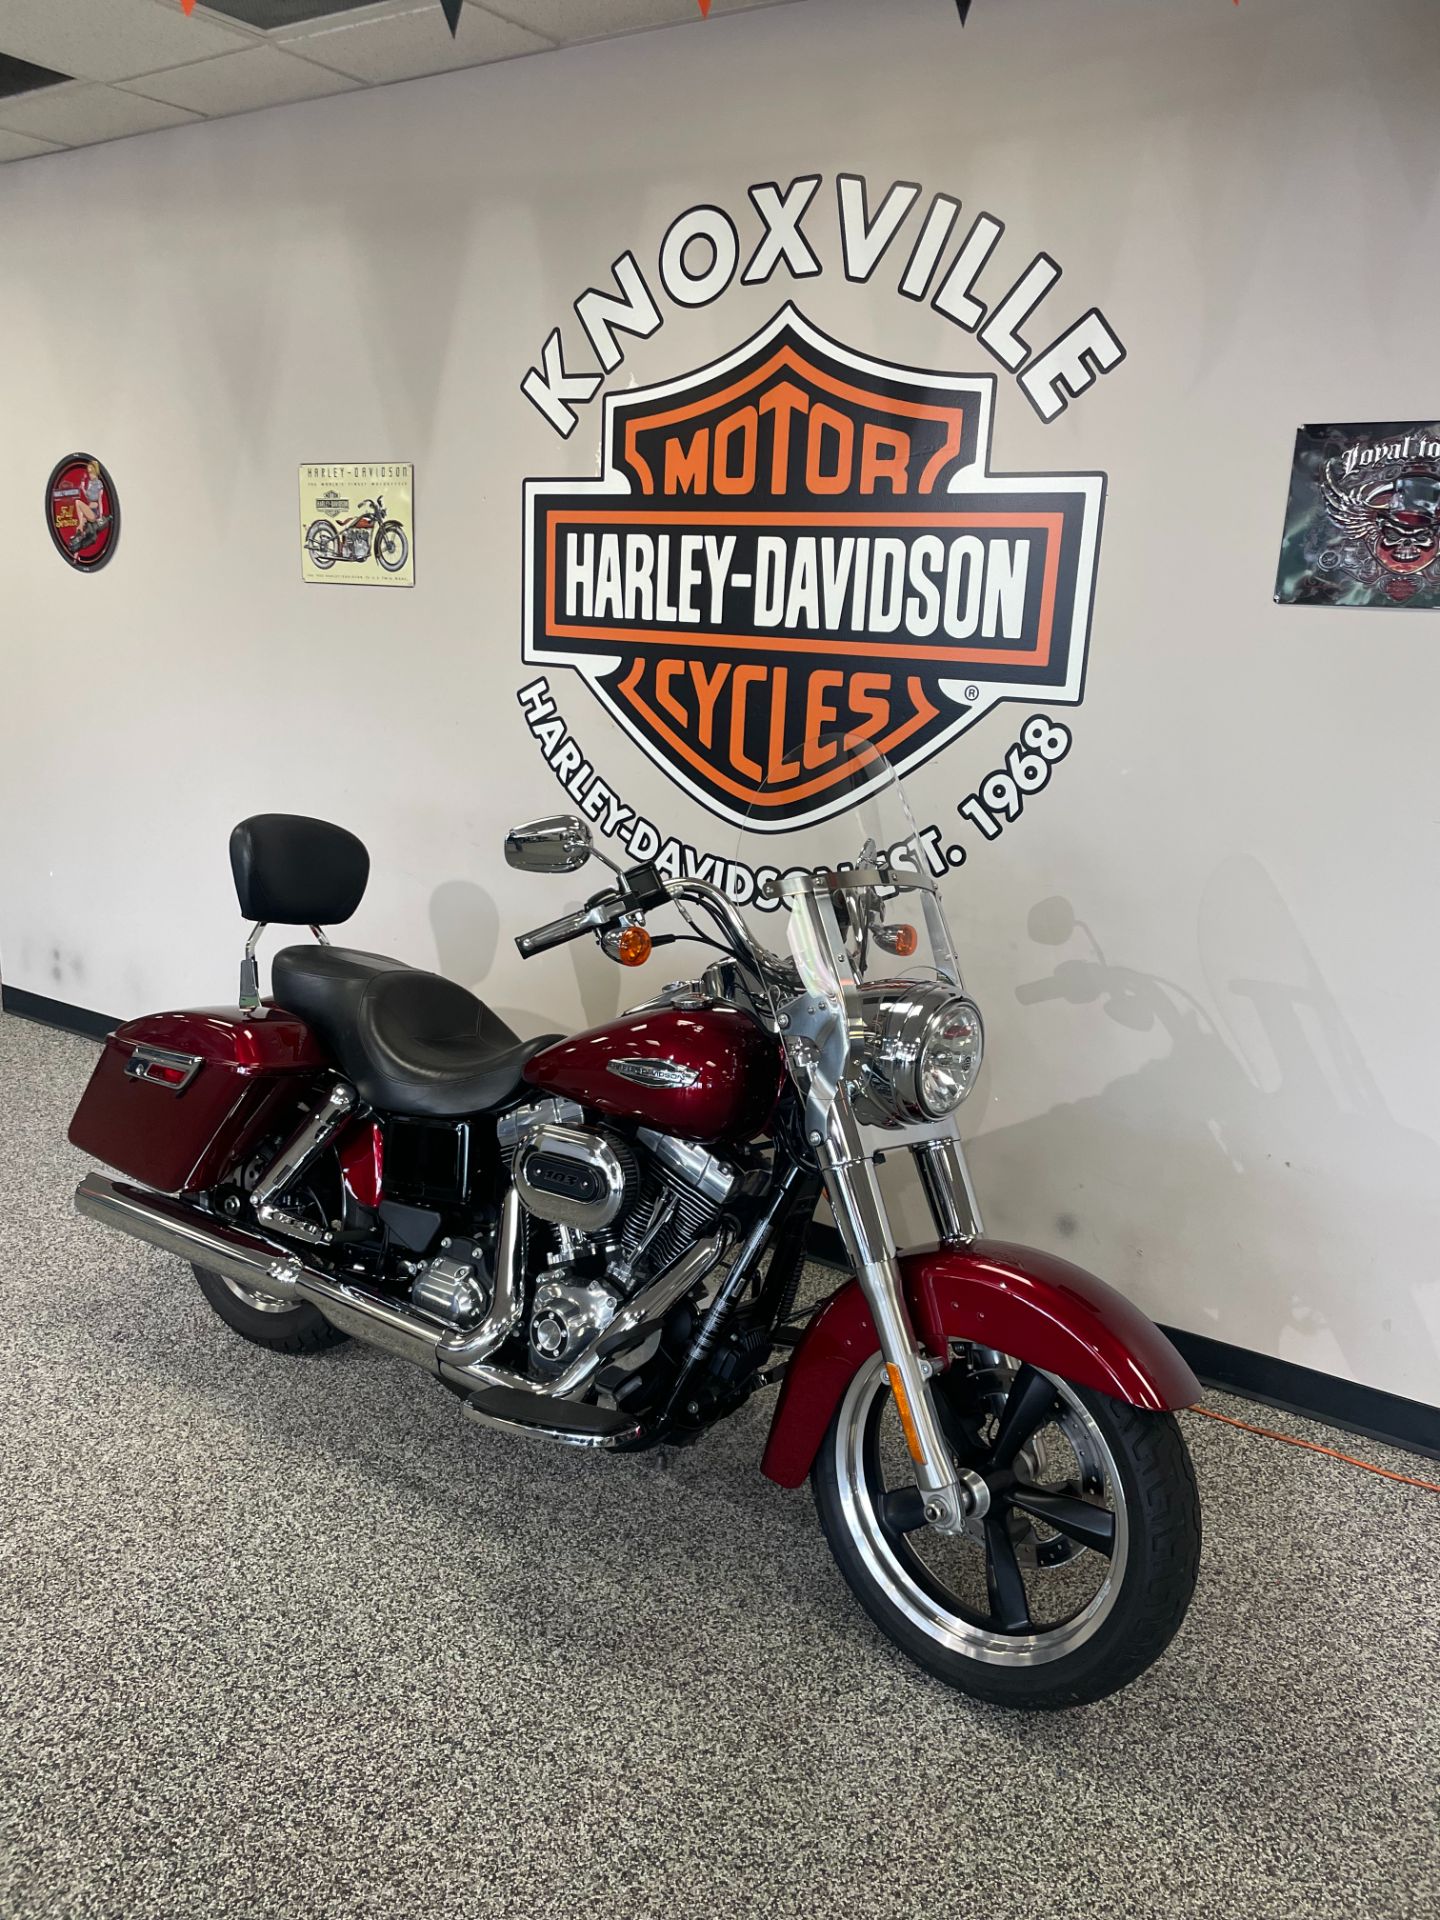 2016 Harley-Davidson DYNA SWITCHBACK 103 in Knoxville, Tennessee - Photo 3